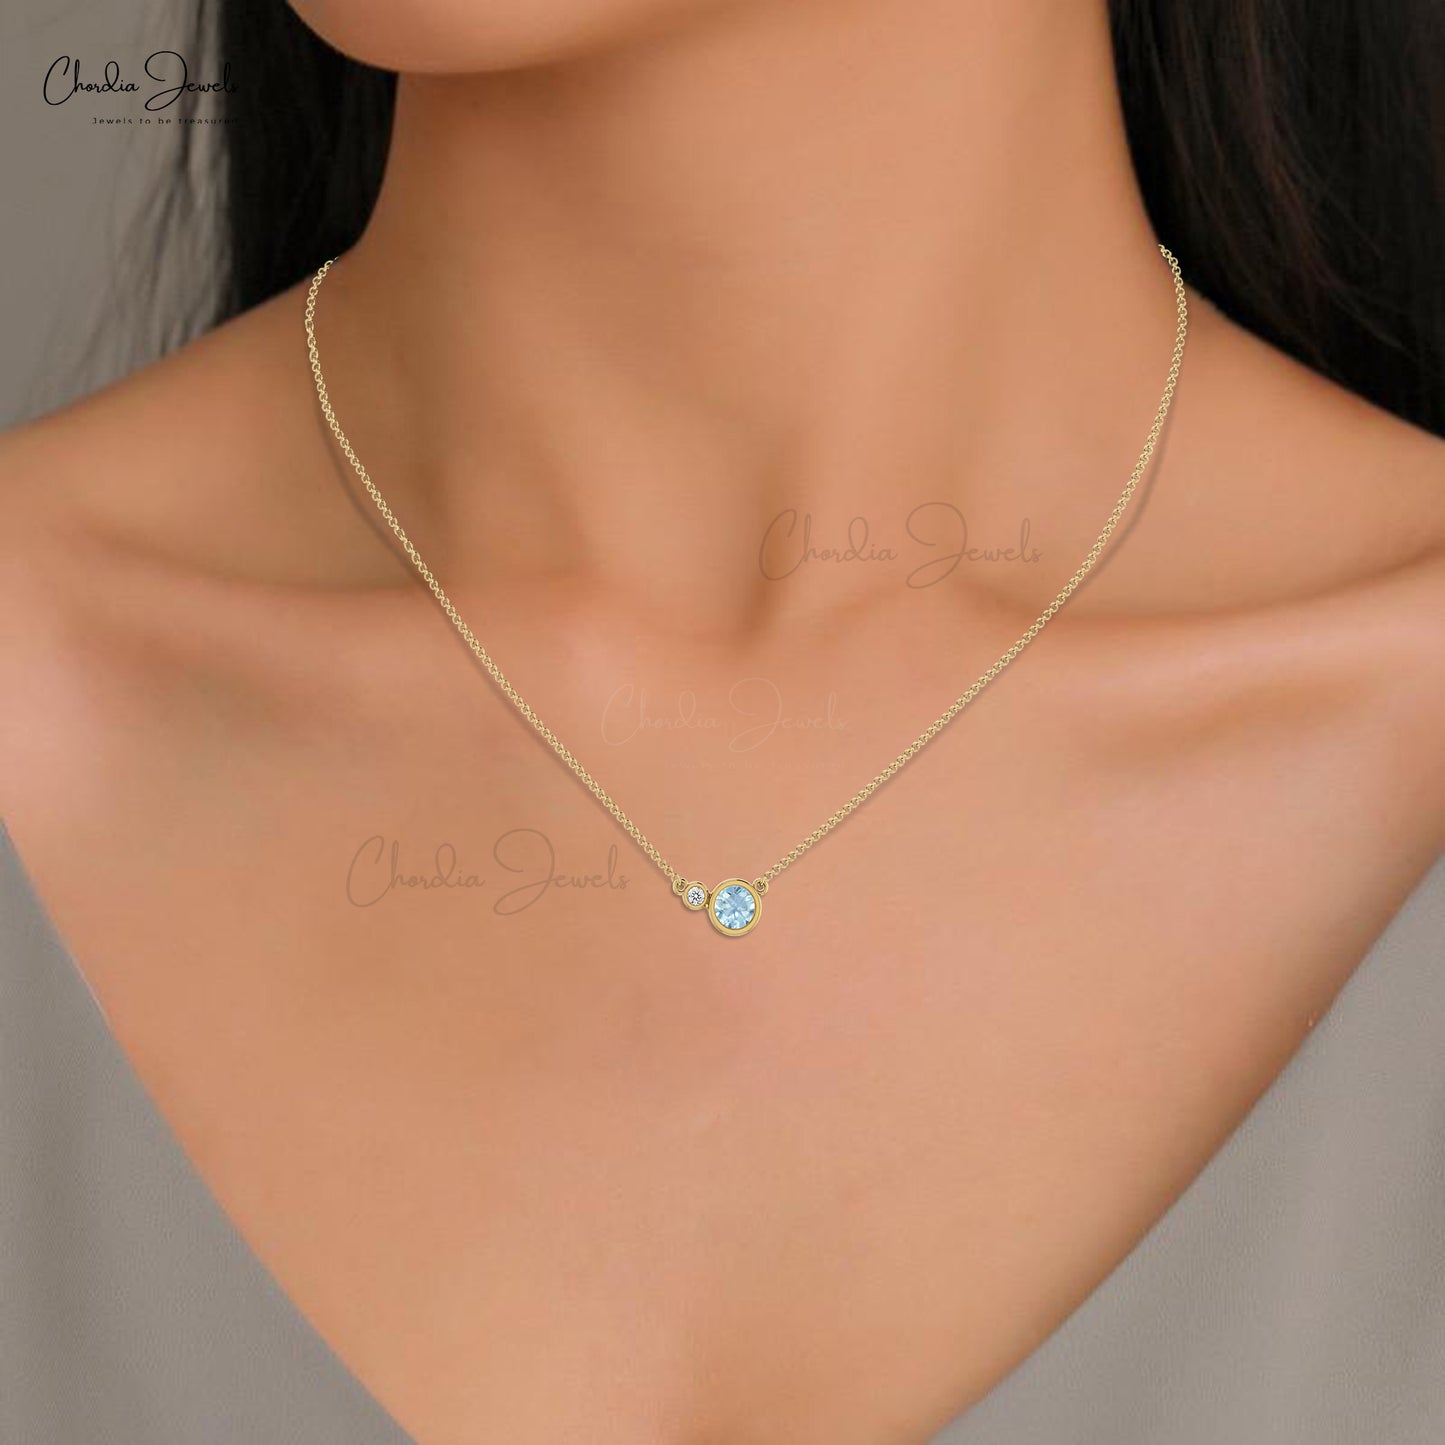 Natural Diamond Aquamarine Necklace in 14k Solid Gold